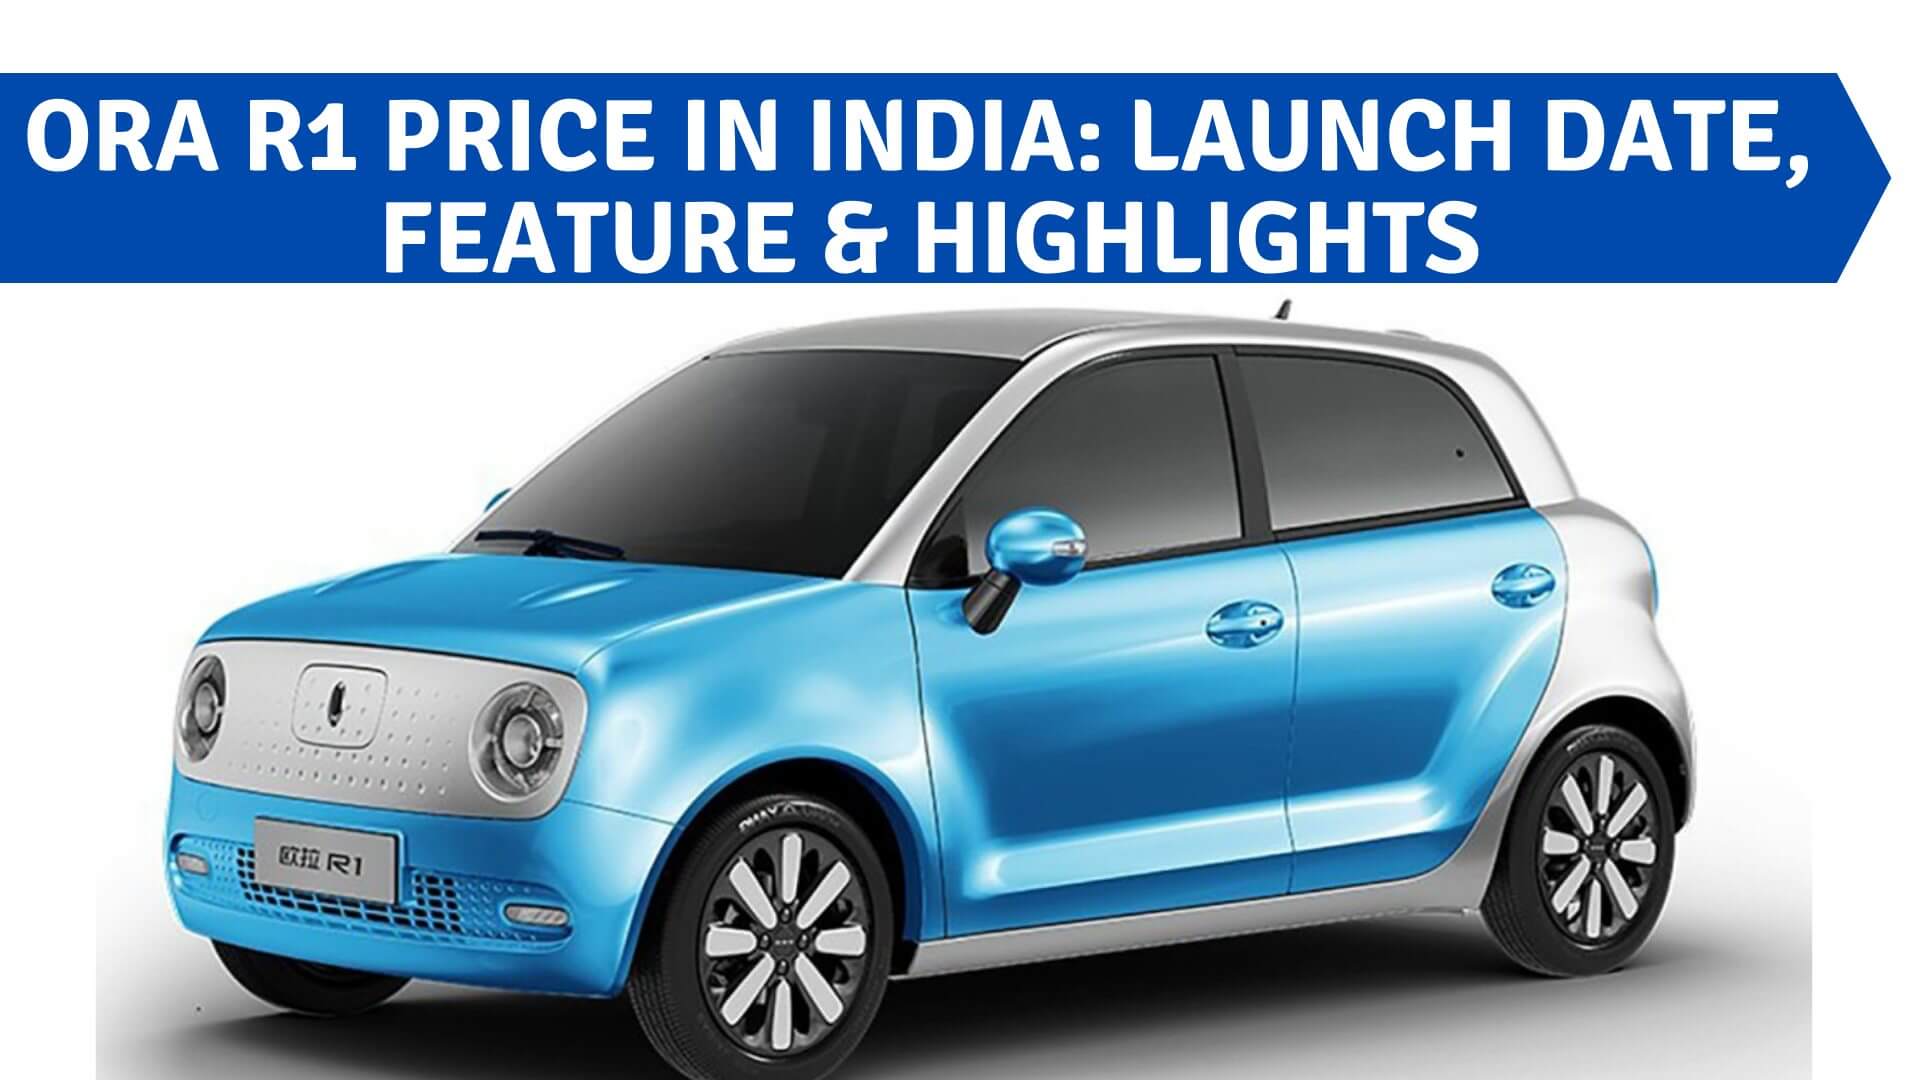 https://e-vehicleinfo.com/ora-r1-price-in-india-launch-date-feature-highlights/